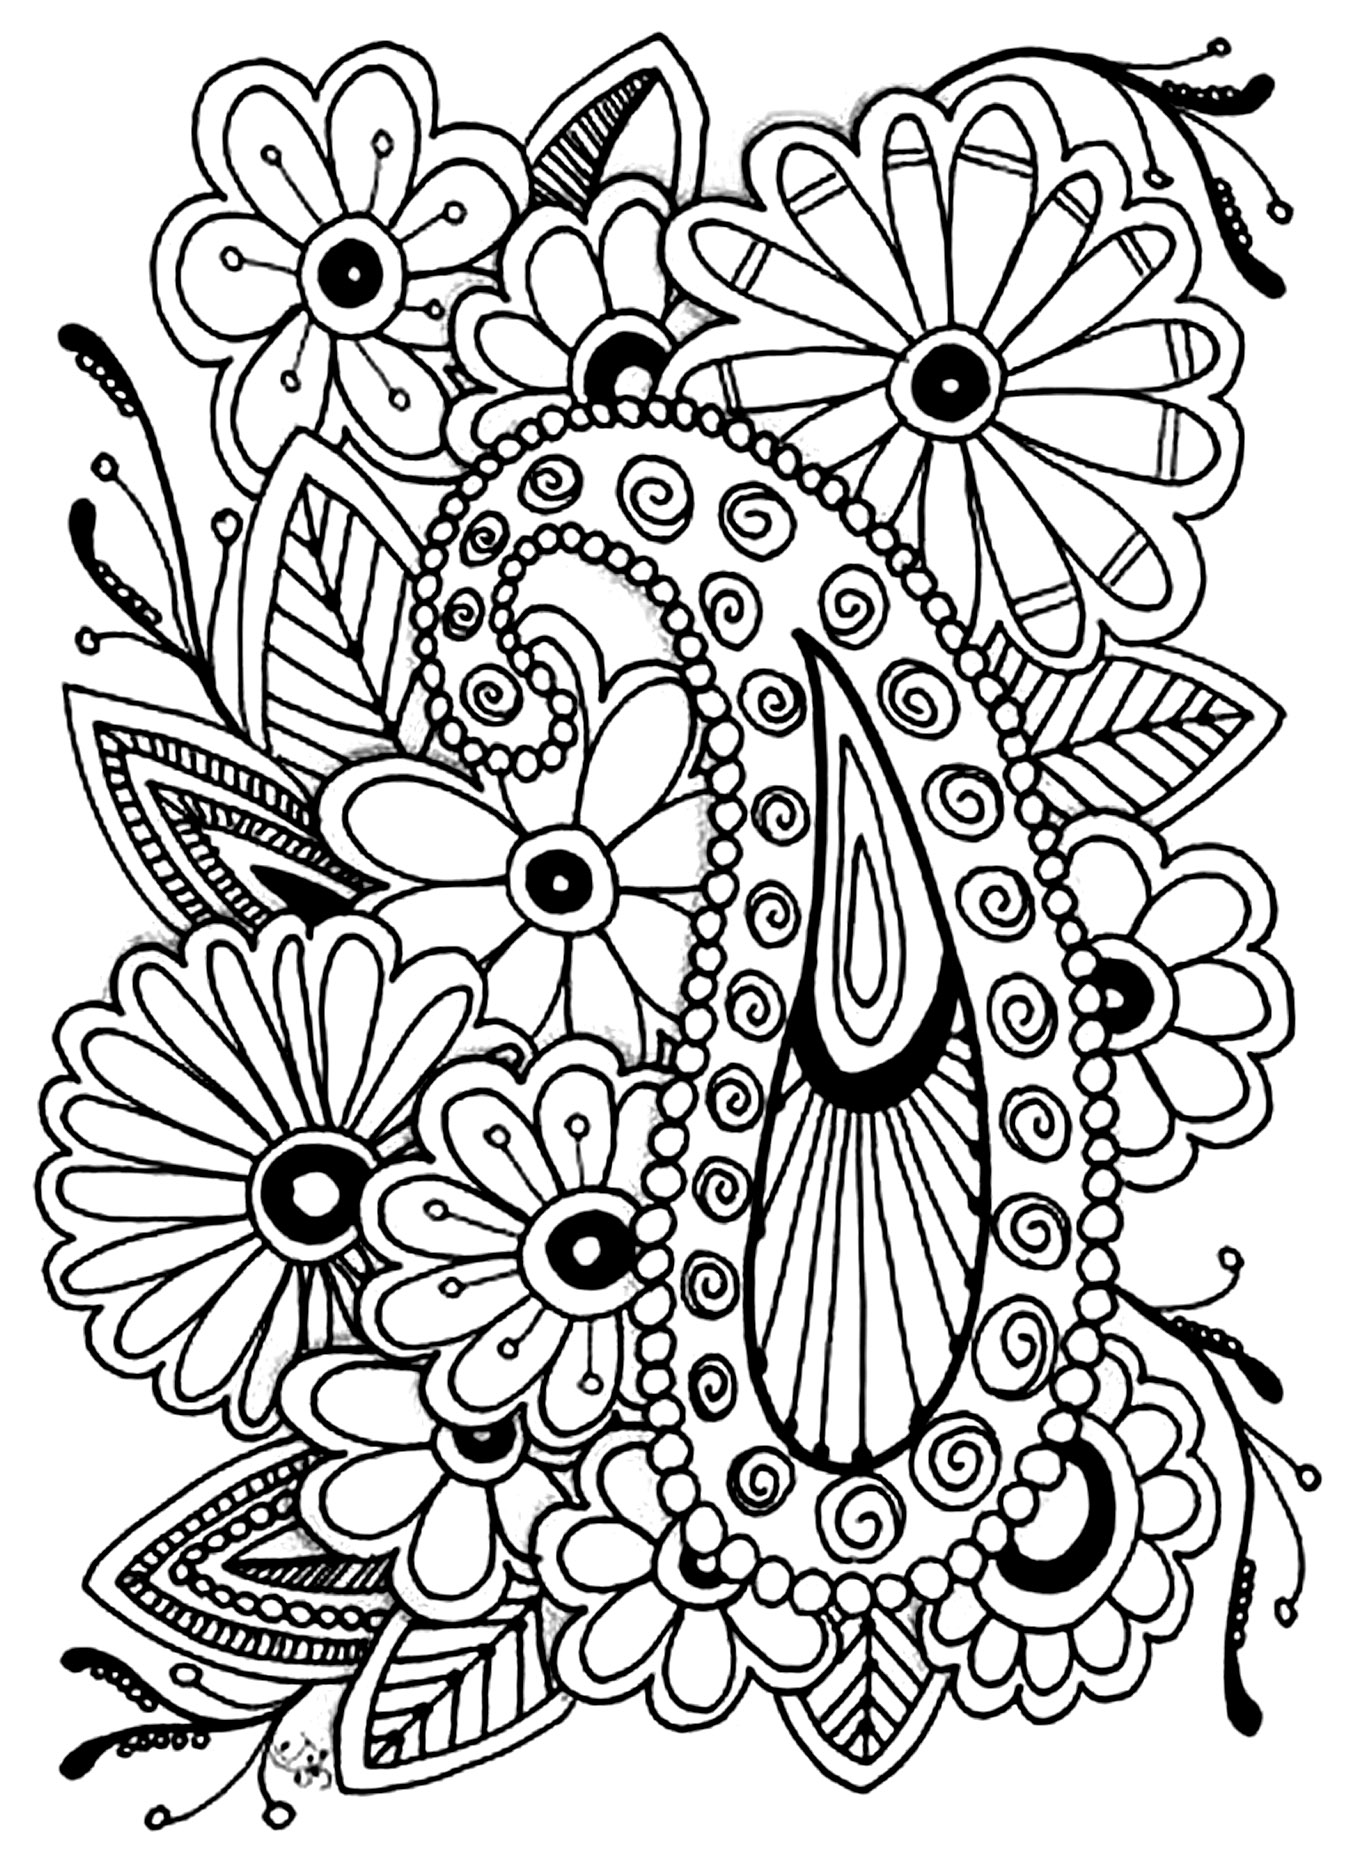 flowers-paisley-flowers-adult-coloring-pages